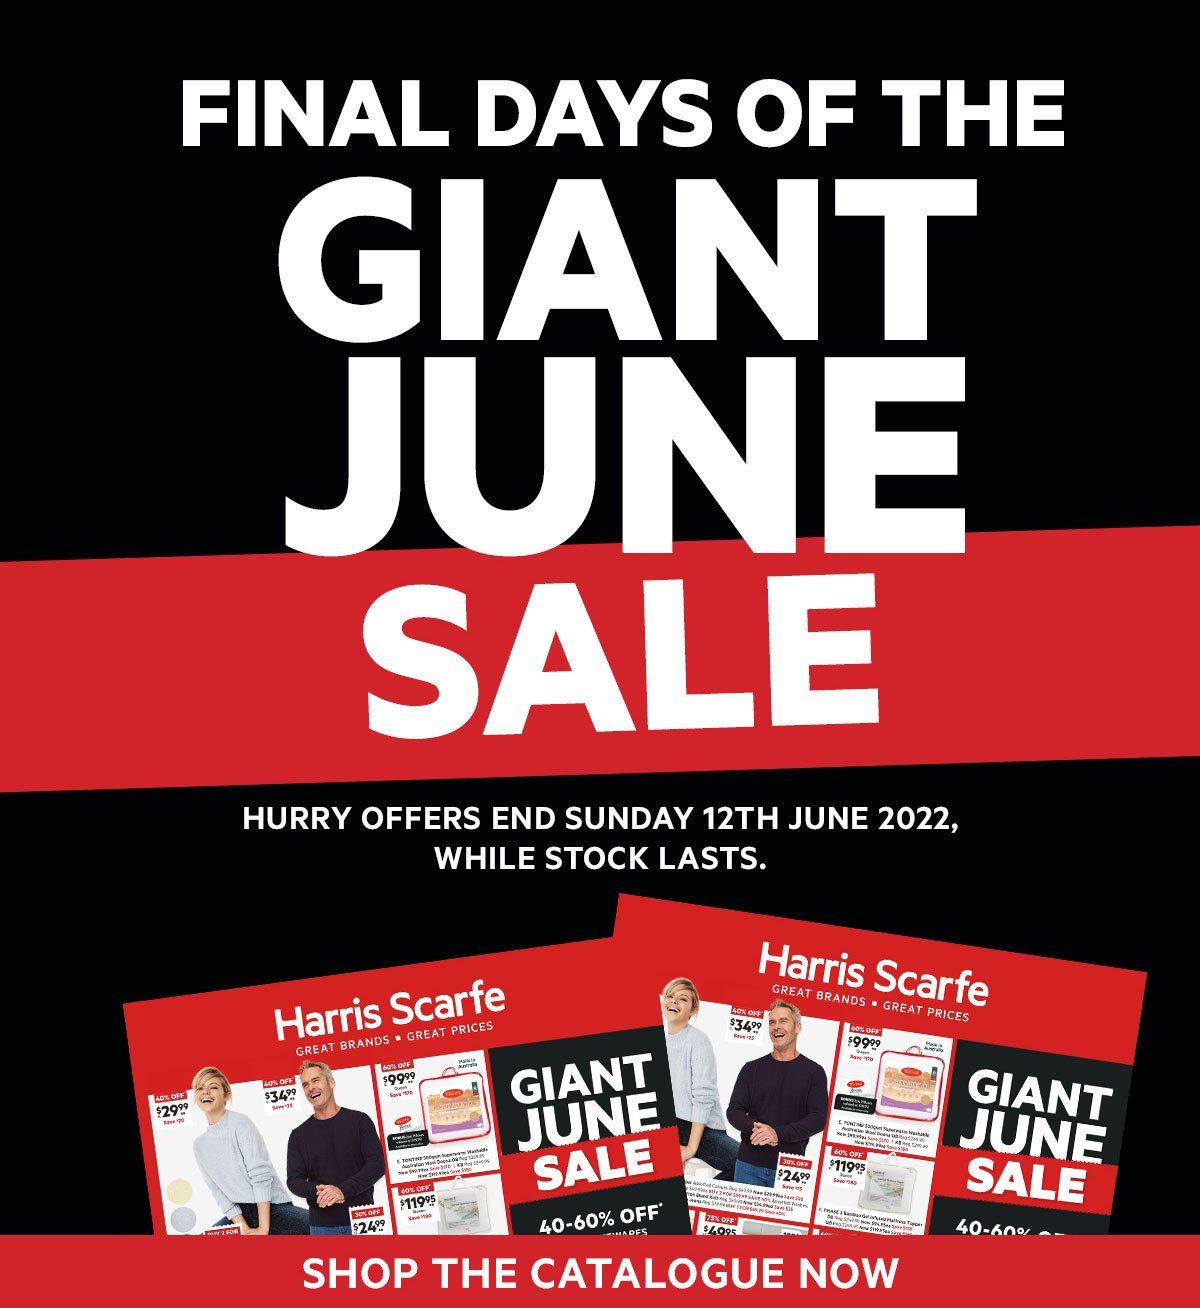 Giant June Sale out now